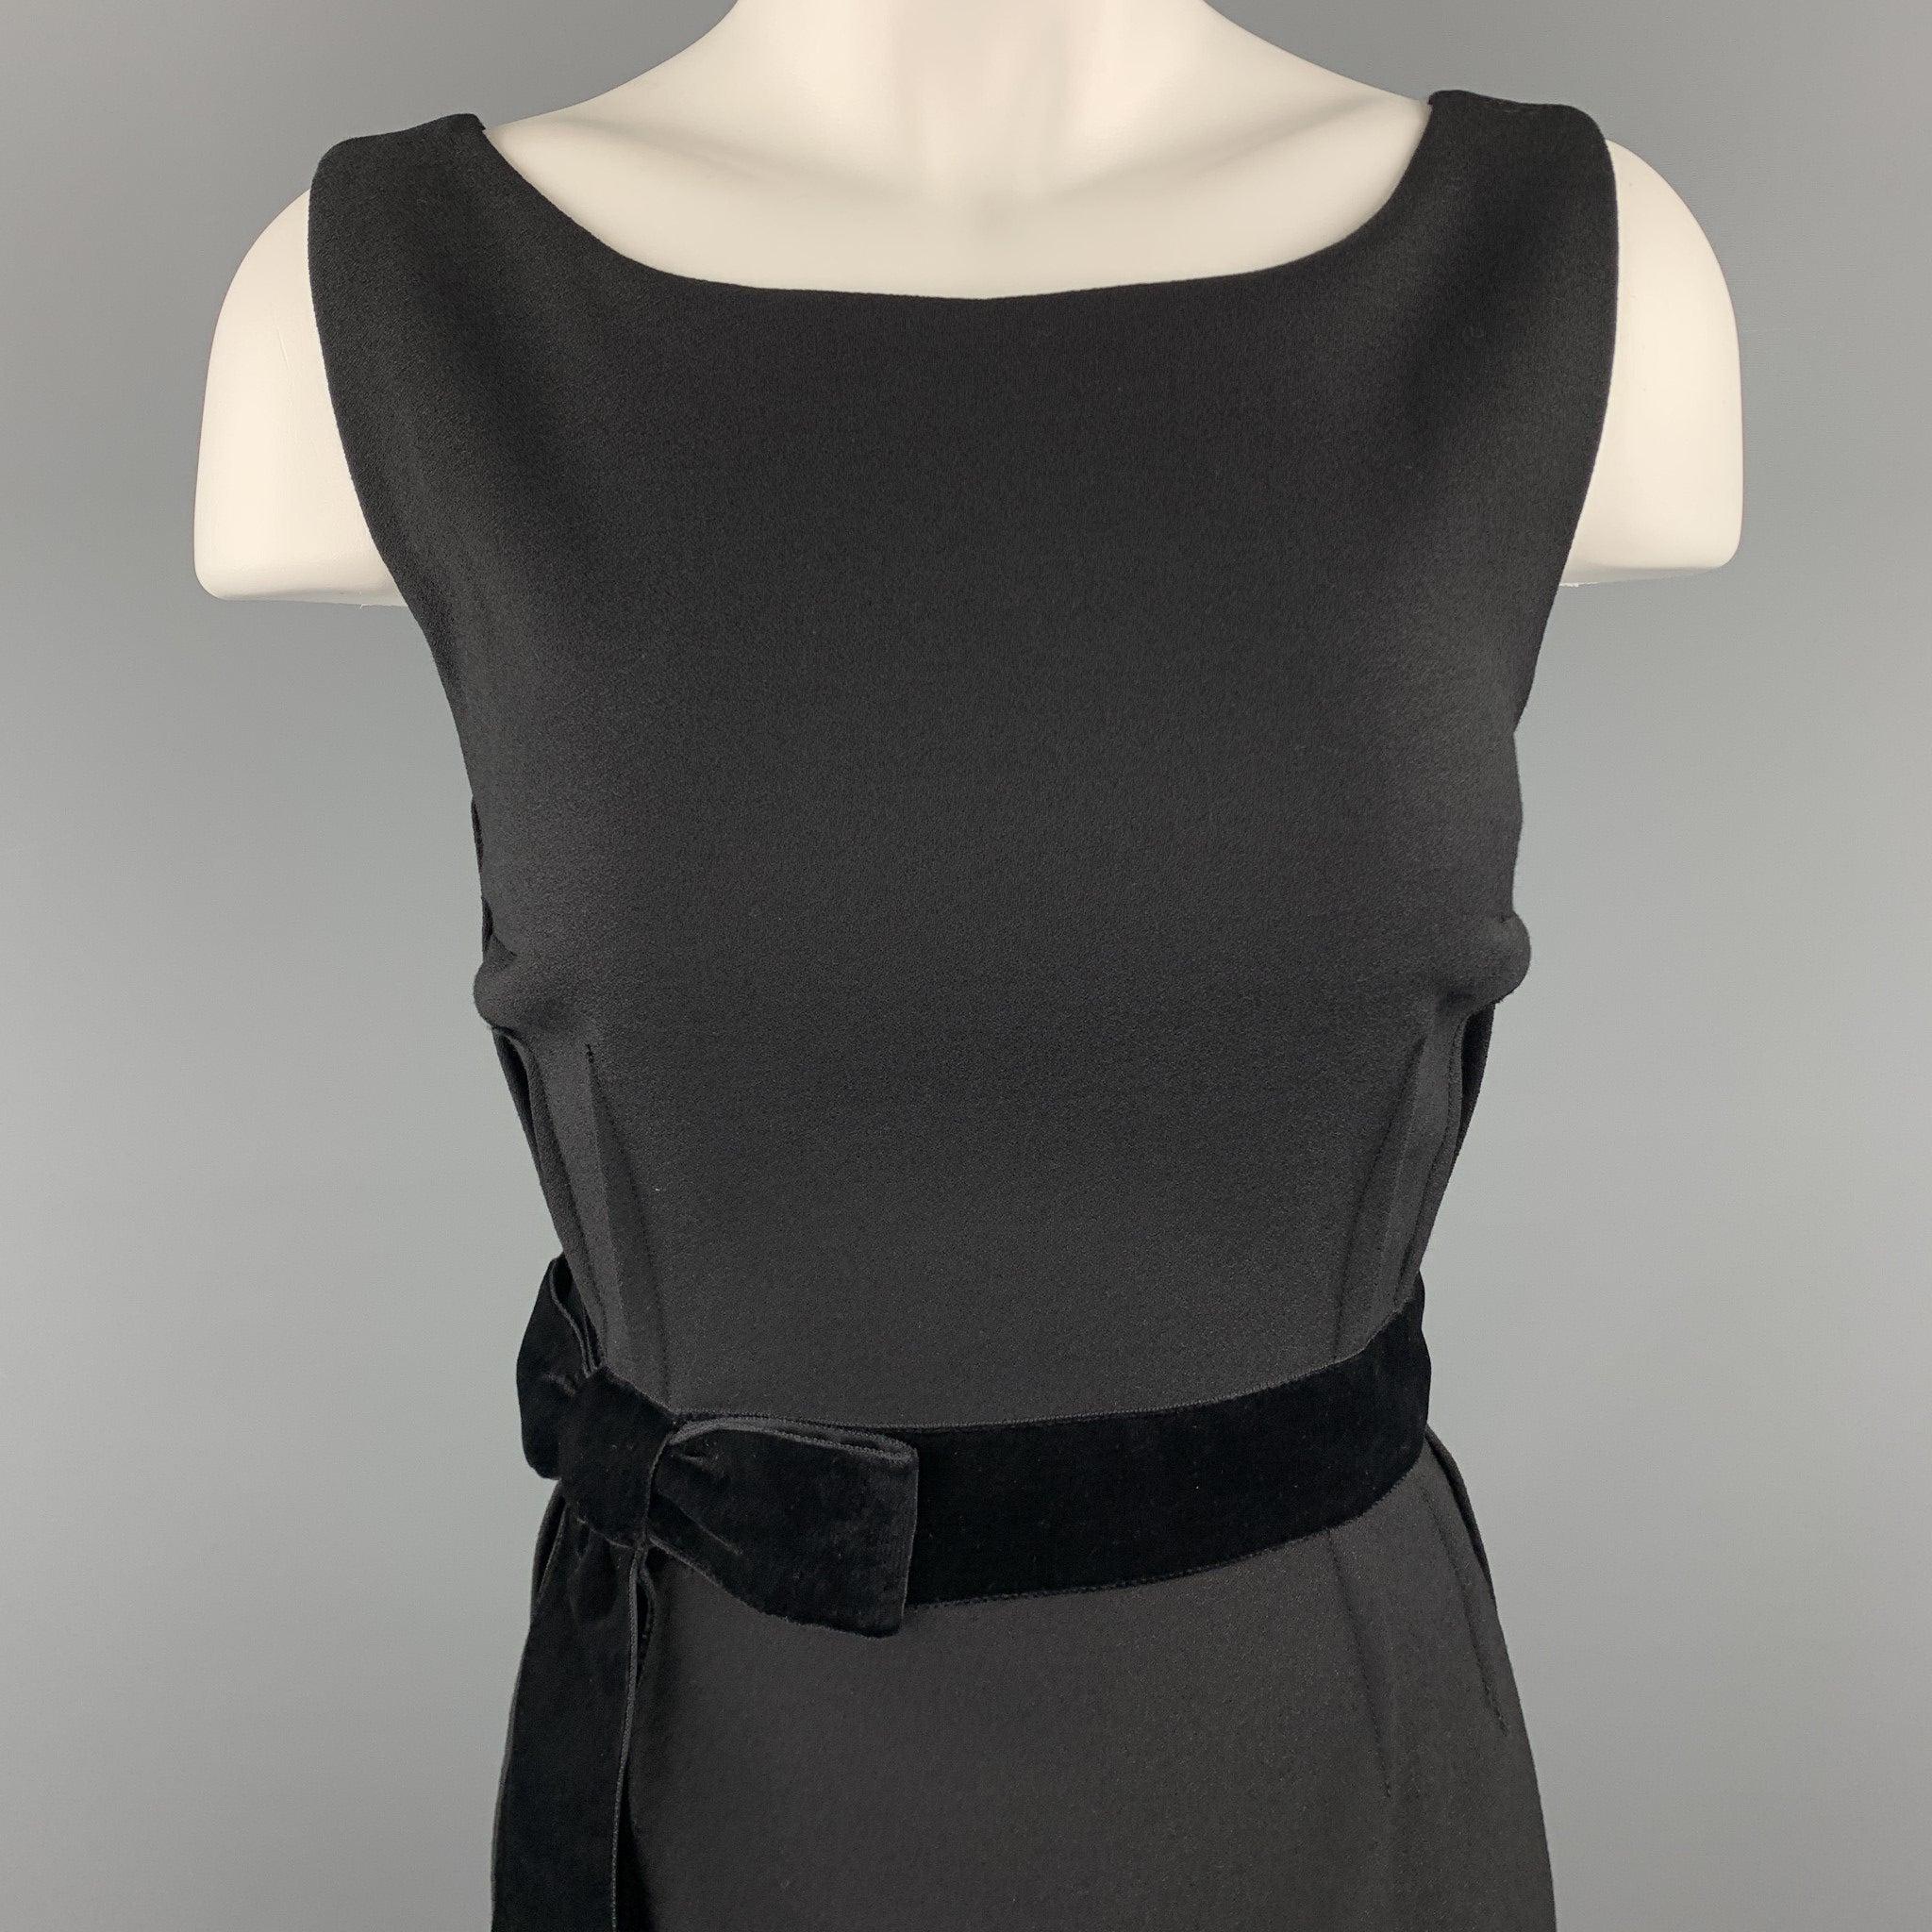 Sleeveless DOLCE & GABBANA shift dress comes in black virgin wool crepe with a boat neckline, outter dart construction, and velvet bow detail. Made in Italy.Excellent
Pre-Owned Condition. 

Marked:  IT 40 

Measurements: 
 
Shoulder:
14 inches